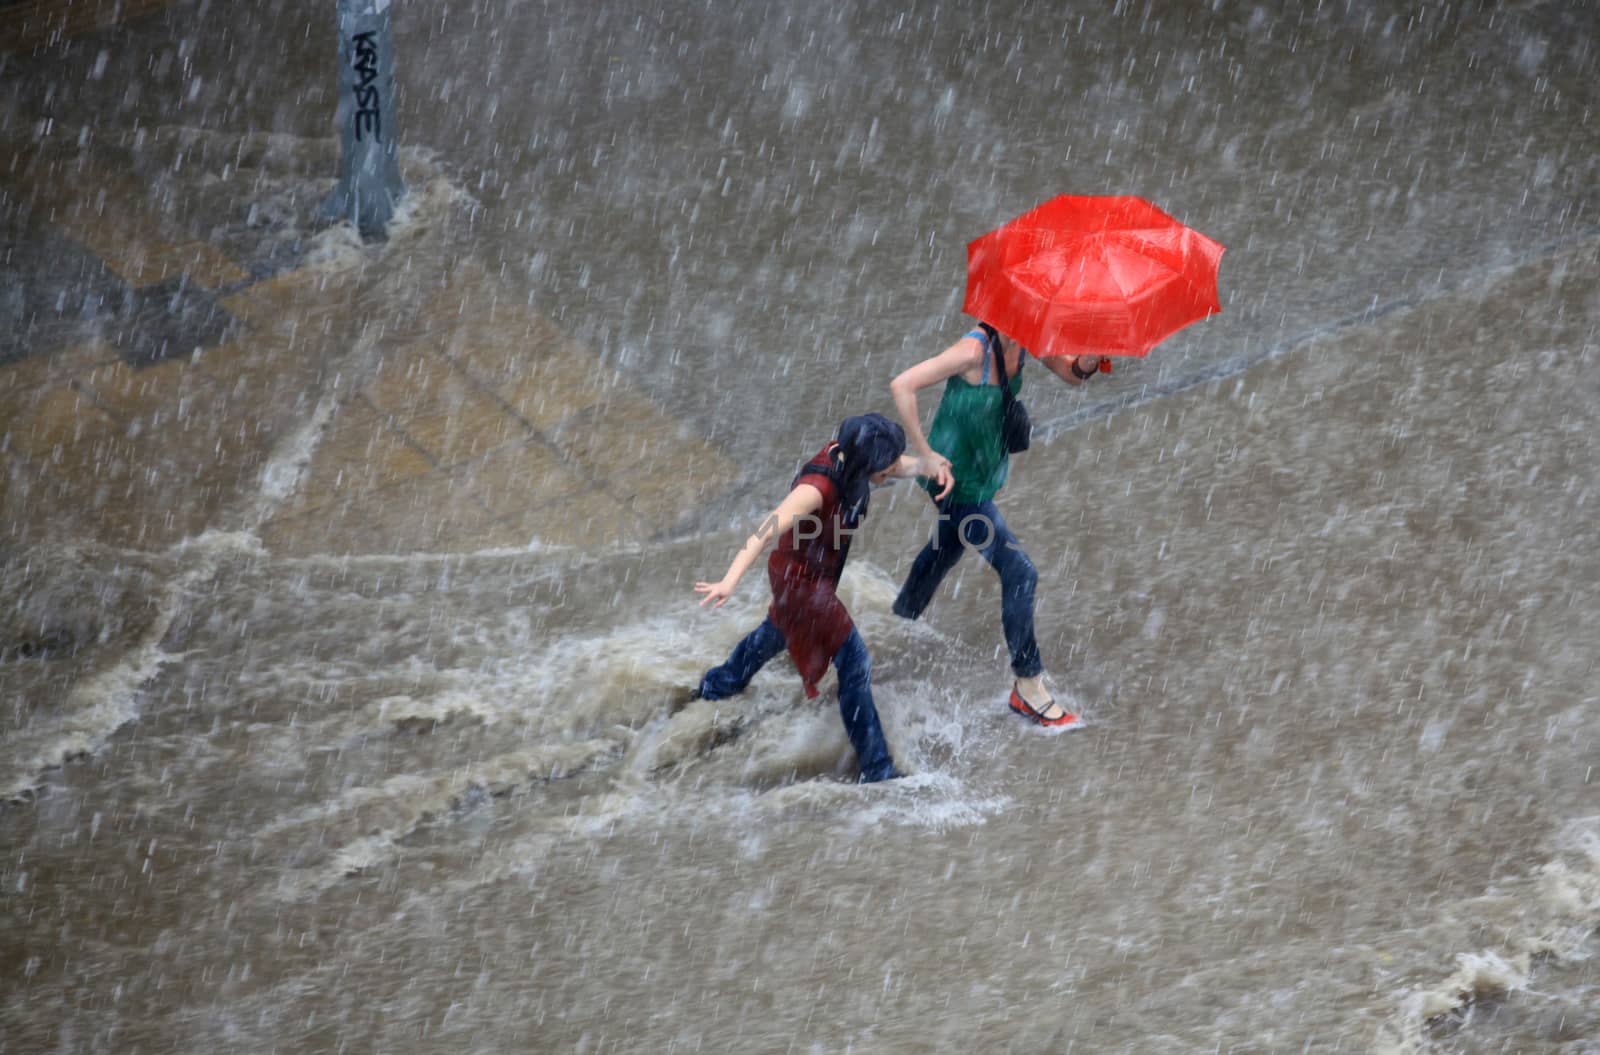 Thessaloniki, Greece - June 15, 2011: People try to cross a flooded road in the center of city. The summer months are a common phenomenon reason for the poor maintenance of drains